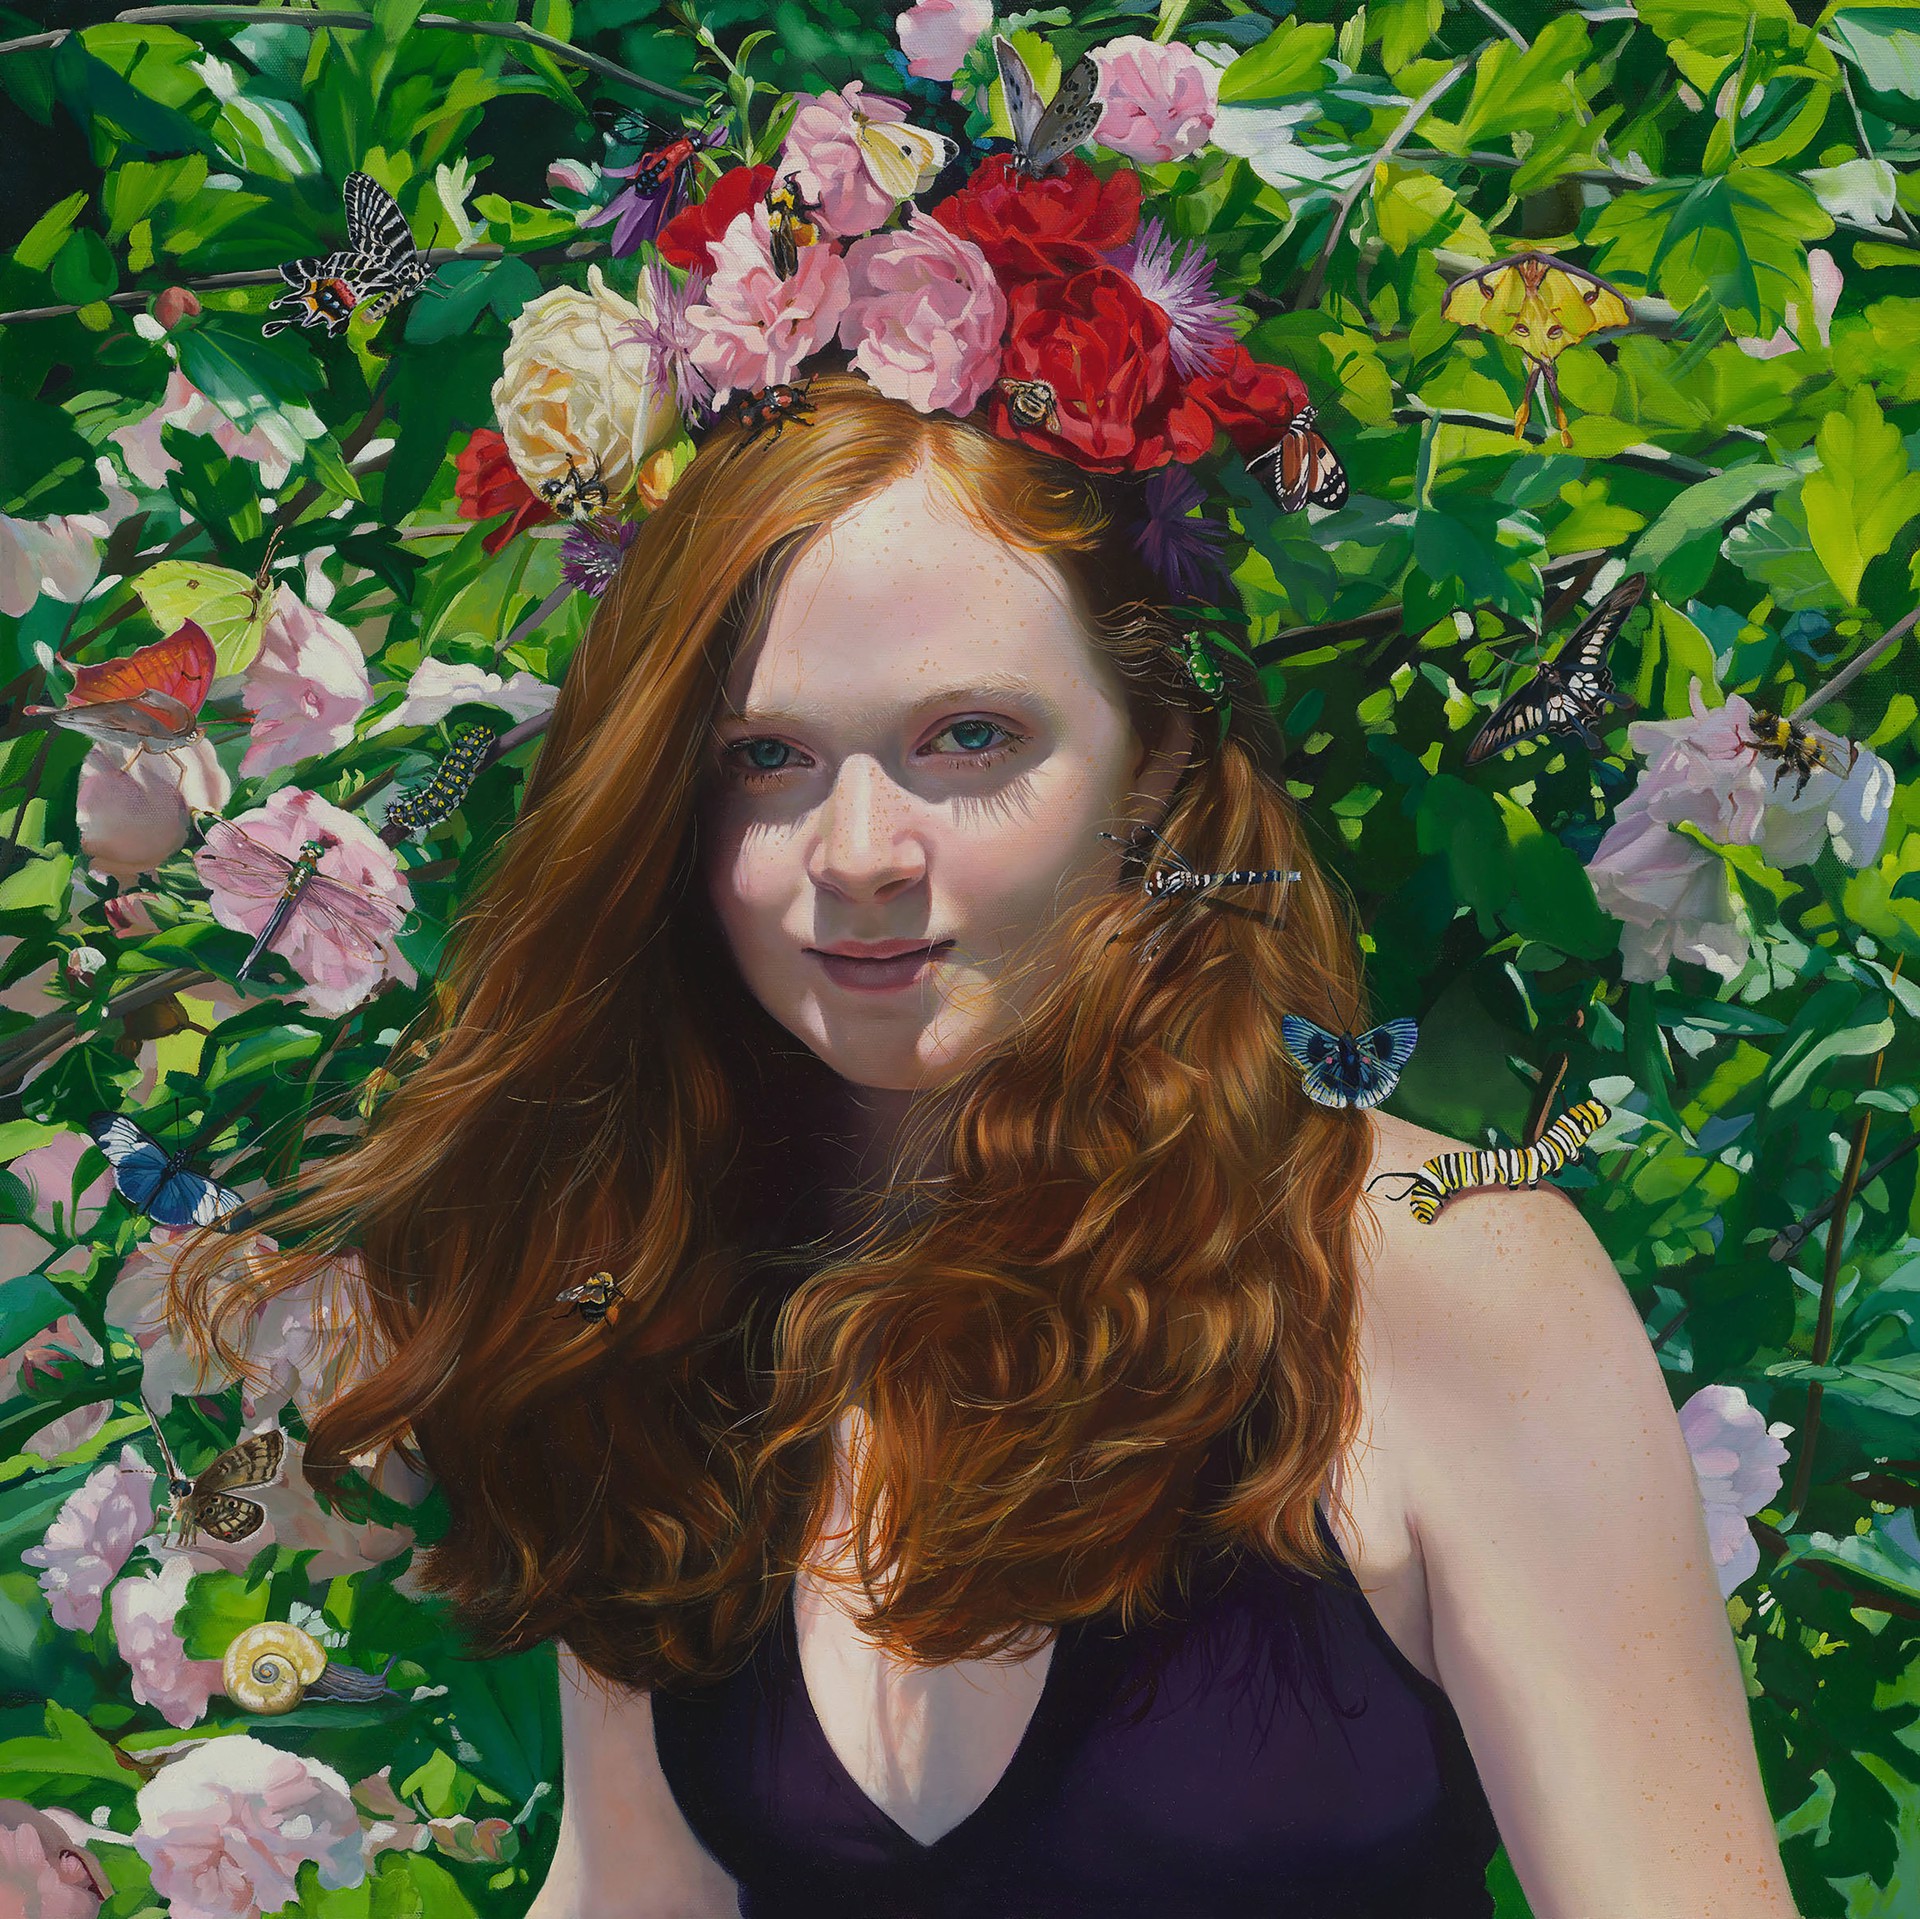 When She Wears Flowers in Her Hair by Bryony Bensly